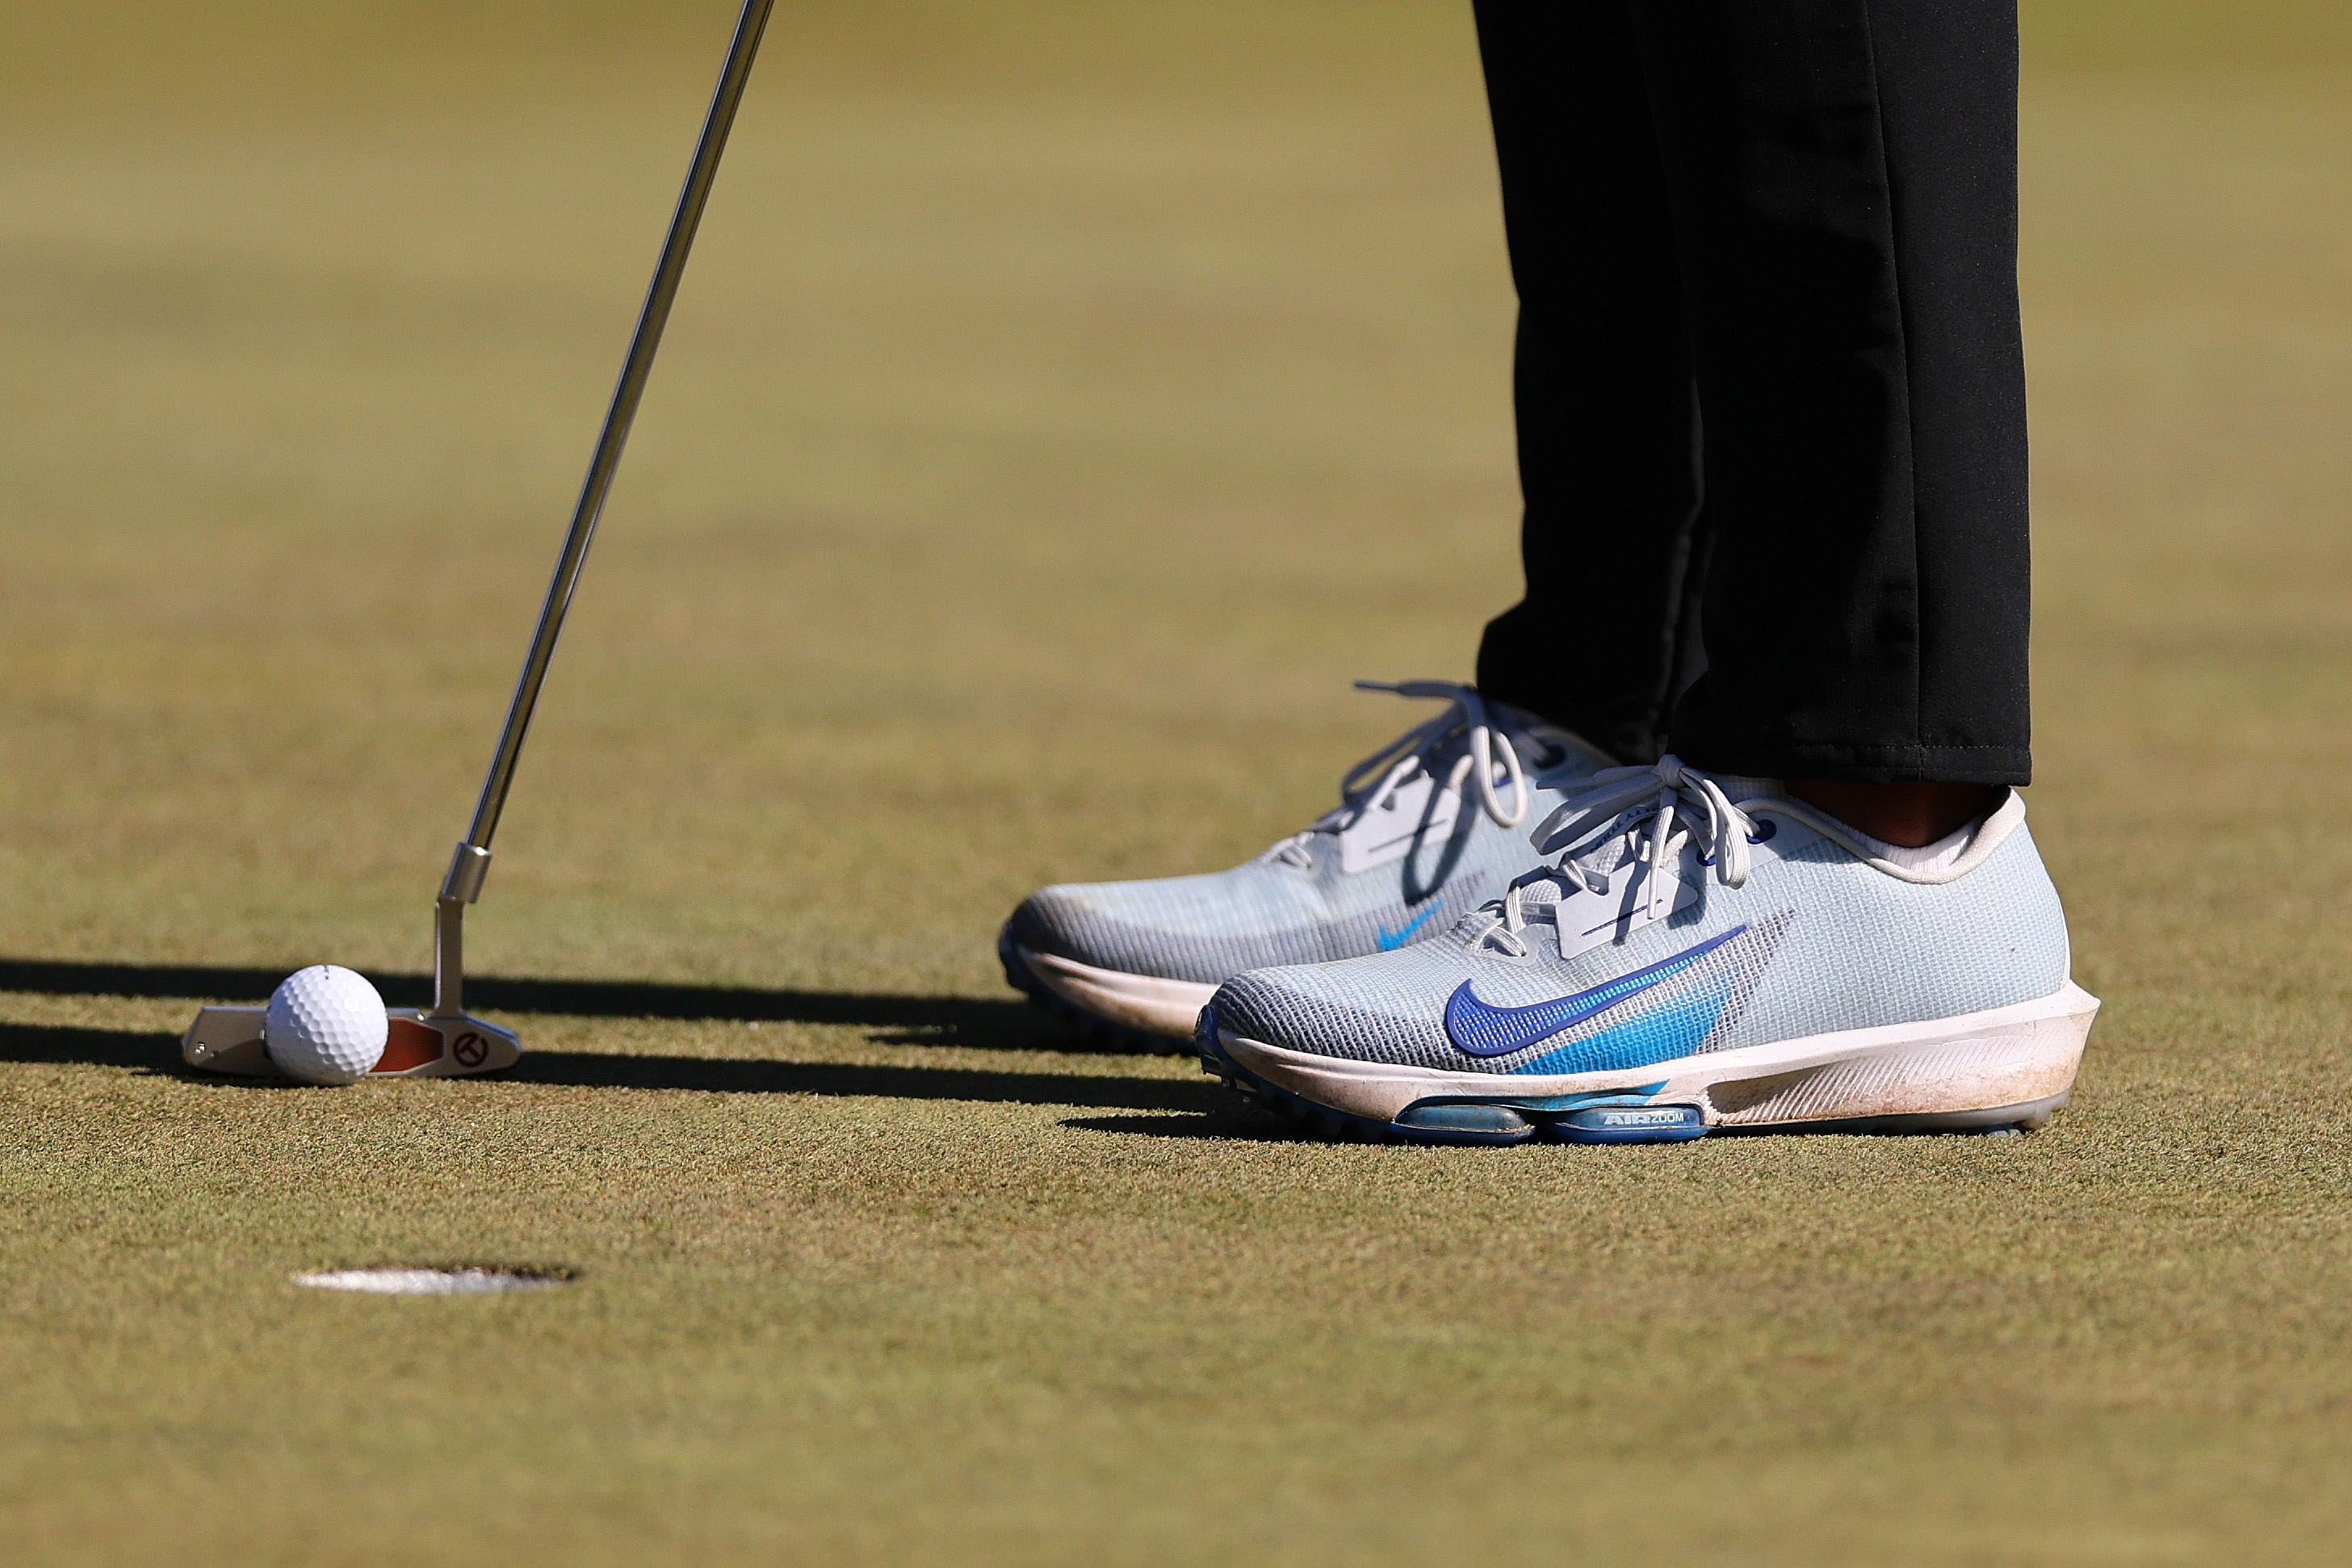 A close up of Brooks Koepka's golf shoes